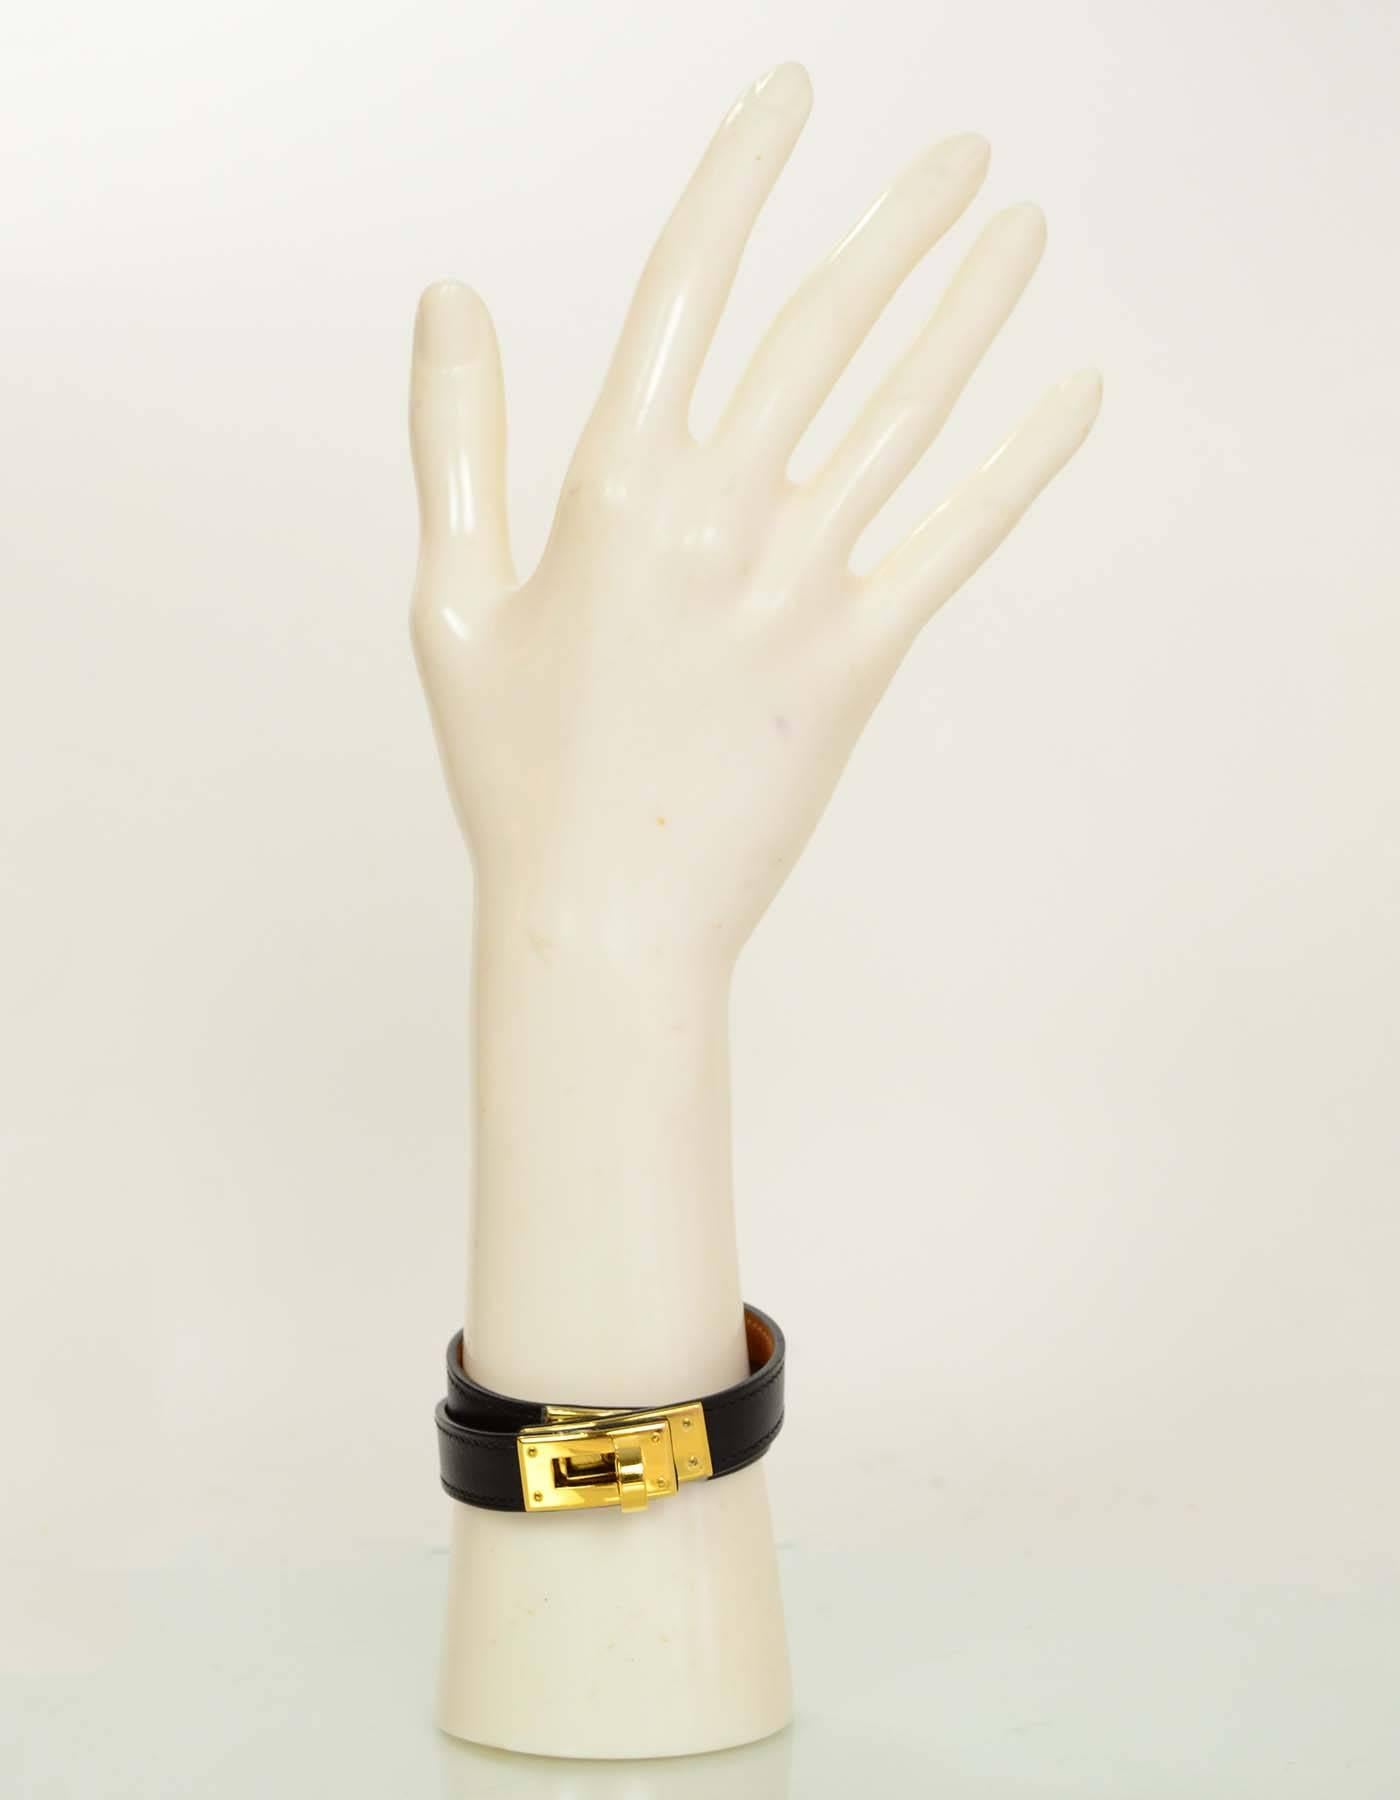 Hermes Kelly Black and GHW Double Tour Bracelet Sz M

Made In: France
Year of Production: 2010
Color: Black and gold
Hardware: Goldtone
Materials: Leather, metal
Closure/Opening: twist lock
Stamp: HERMES PARIS MADE IN FRANCE, N in